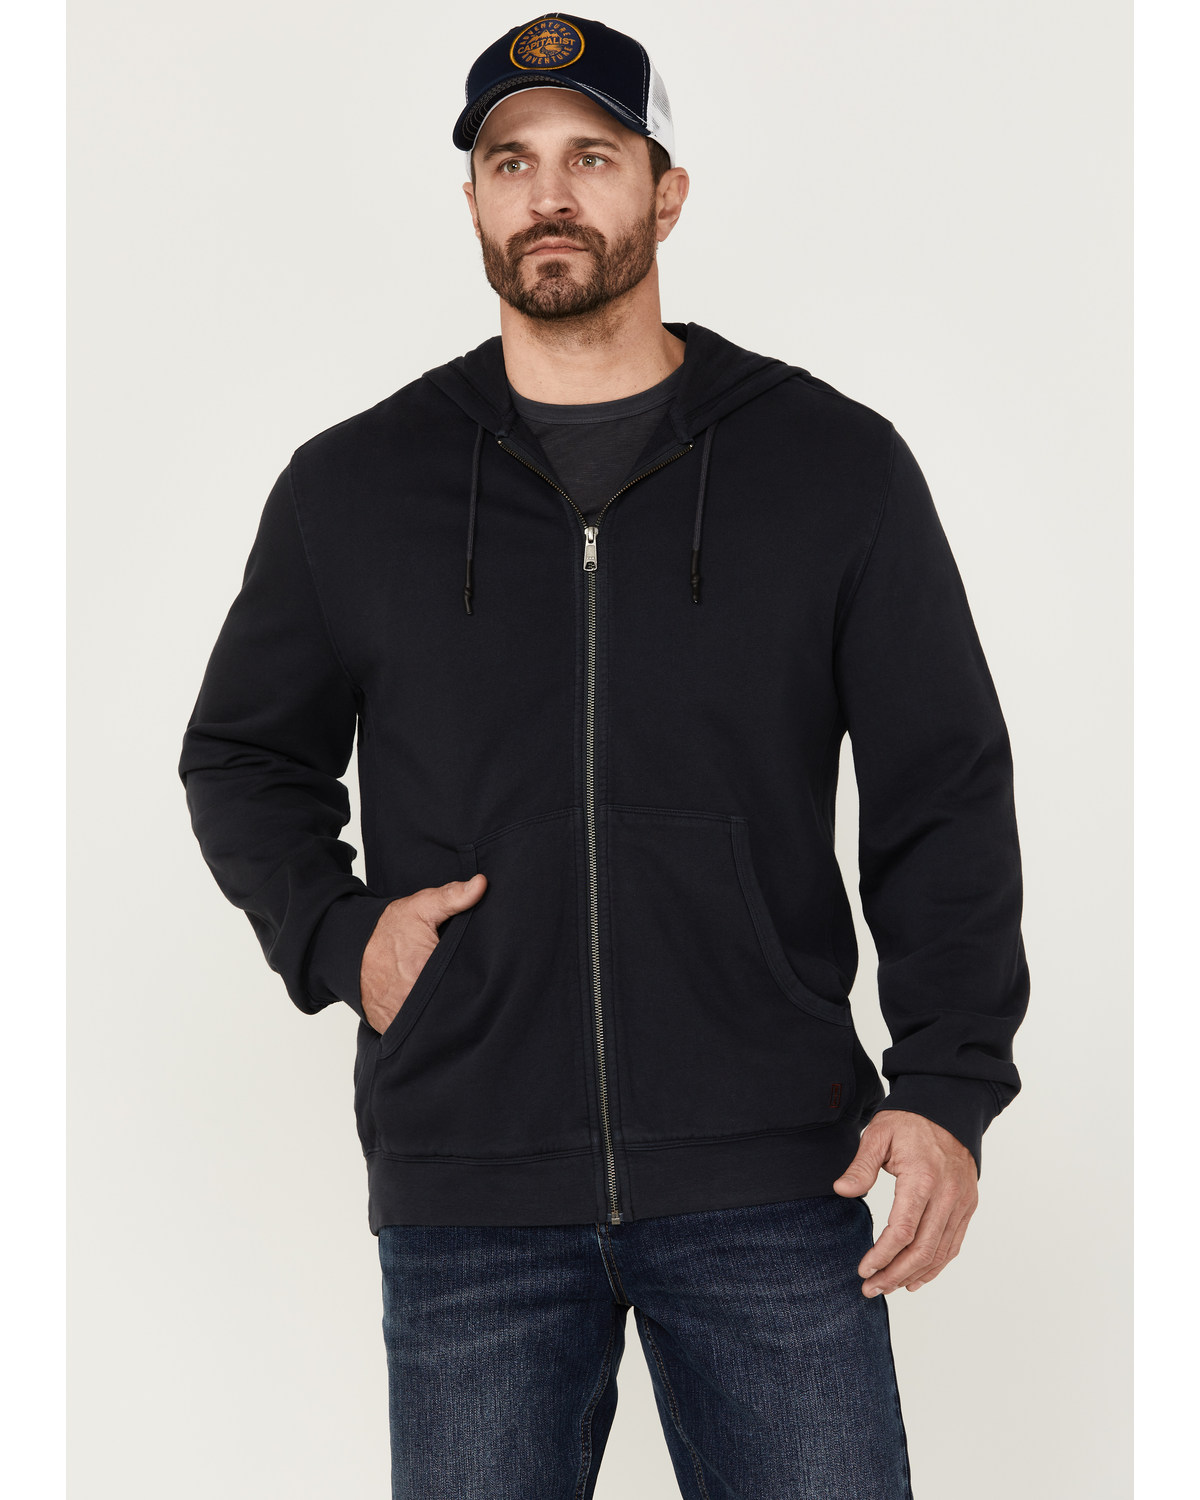 Brothers and Sons Men's Weathered French Terry Zip-Front Hooded Jacket